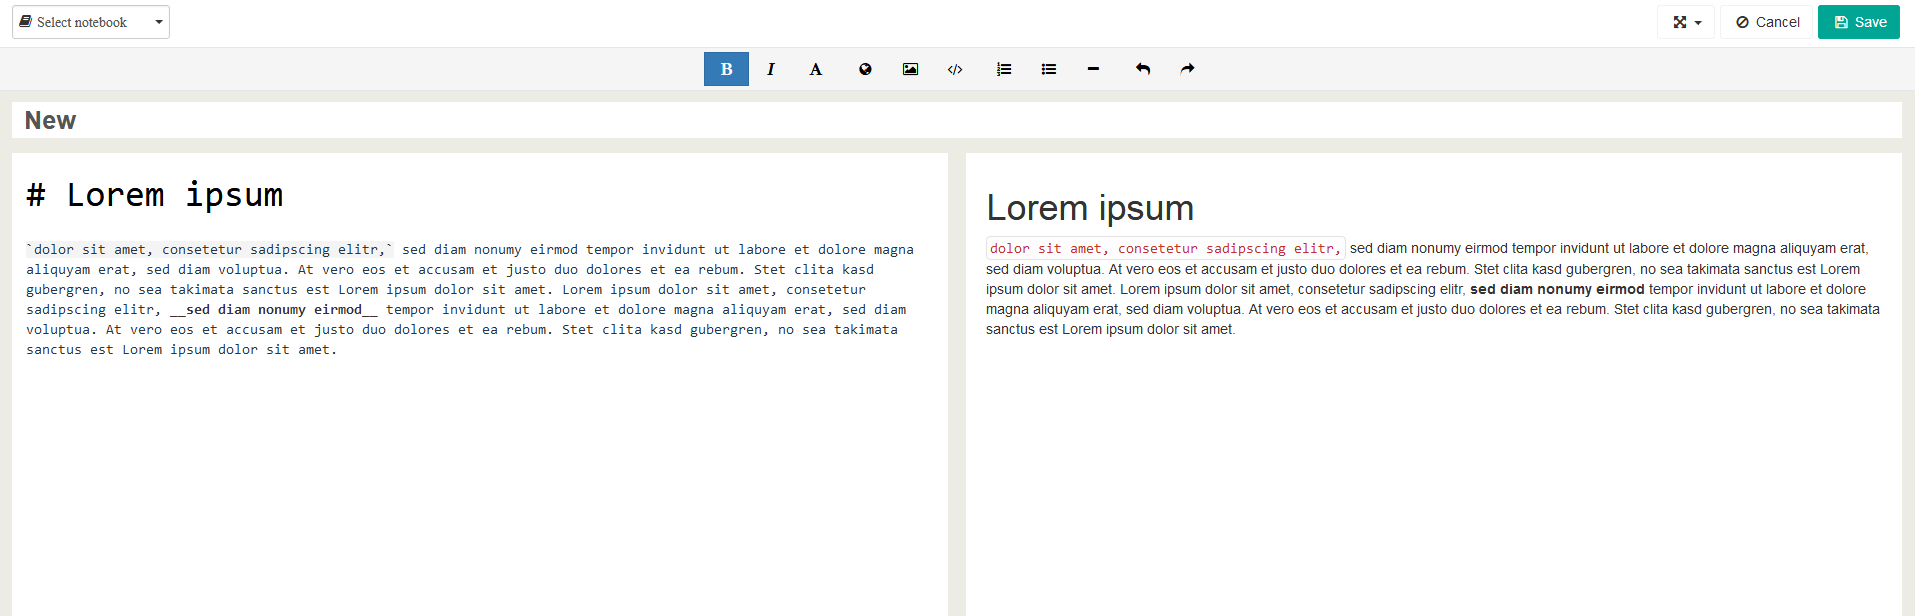 The online version of the Markdown editor Laverna